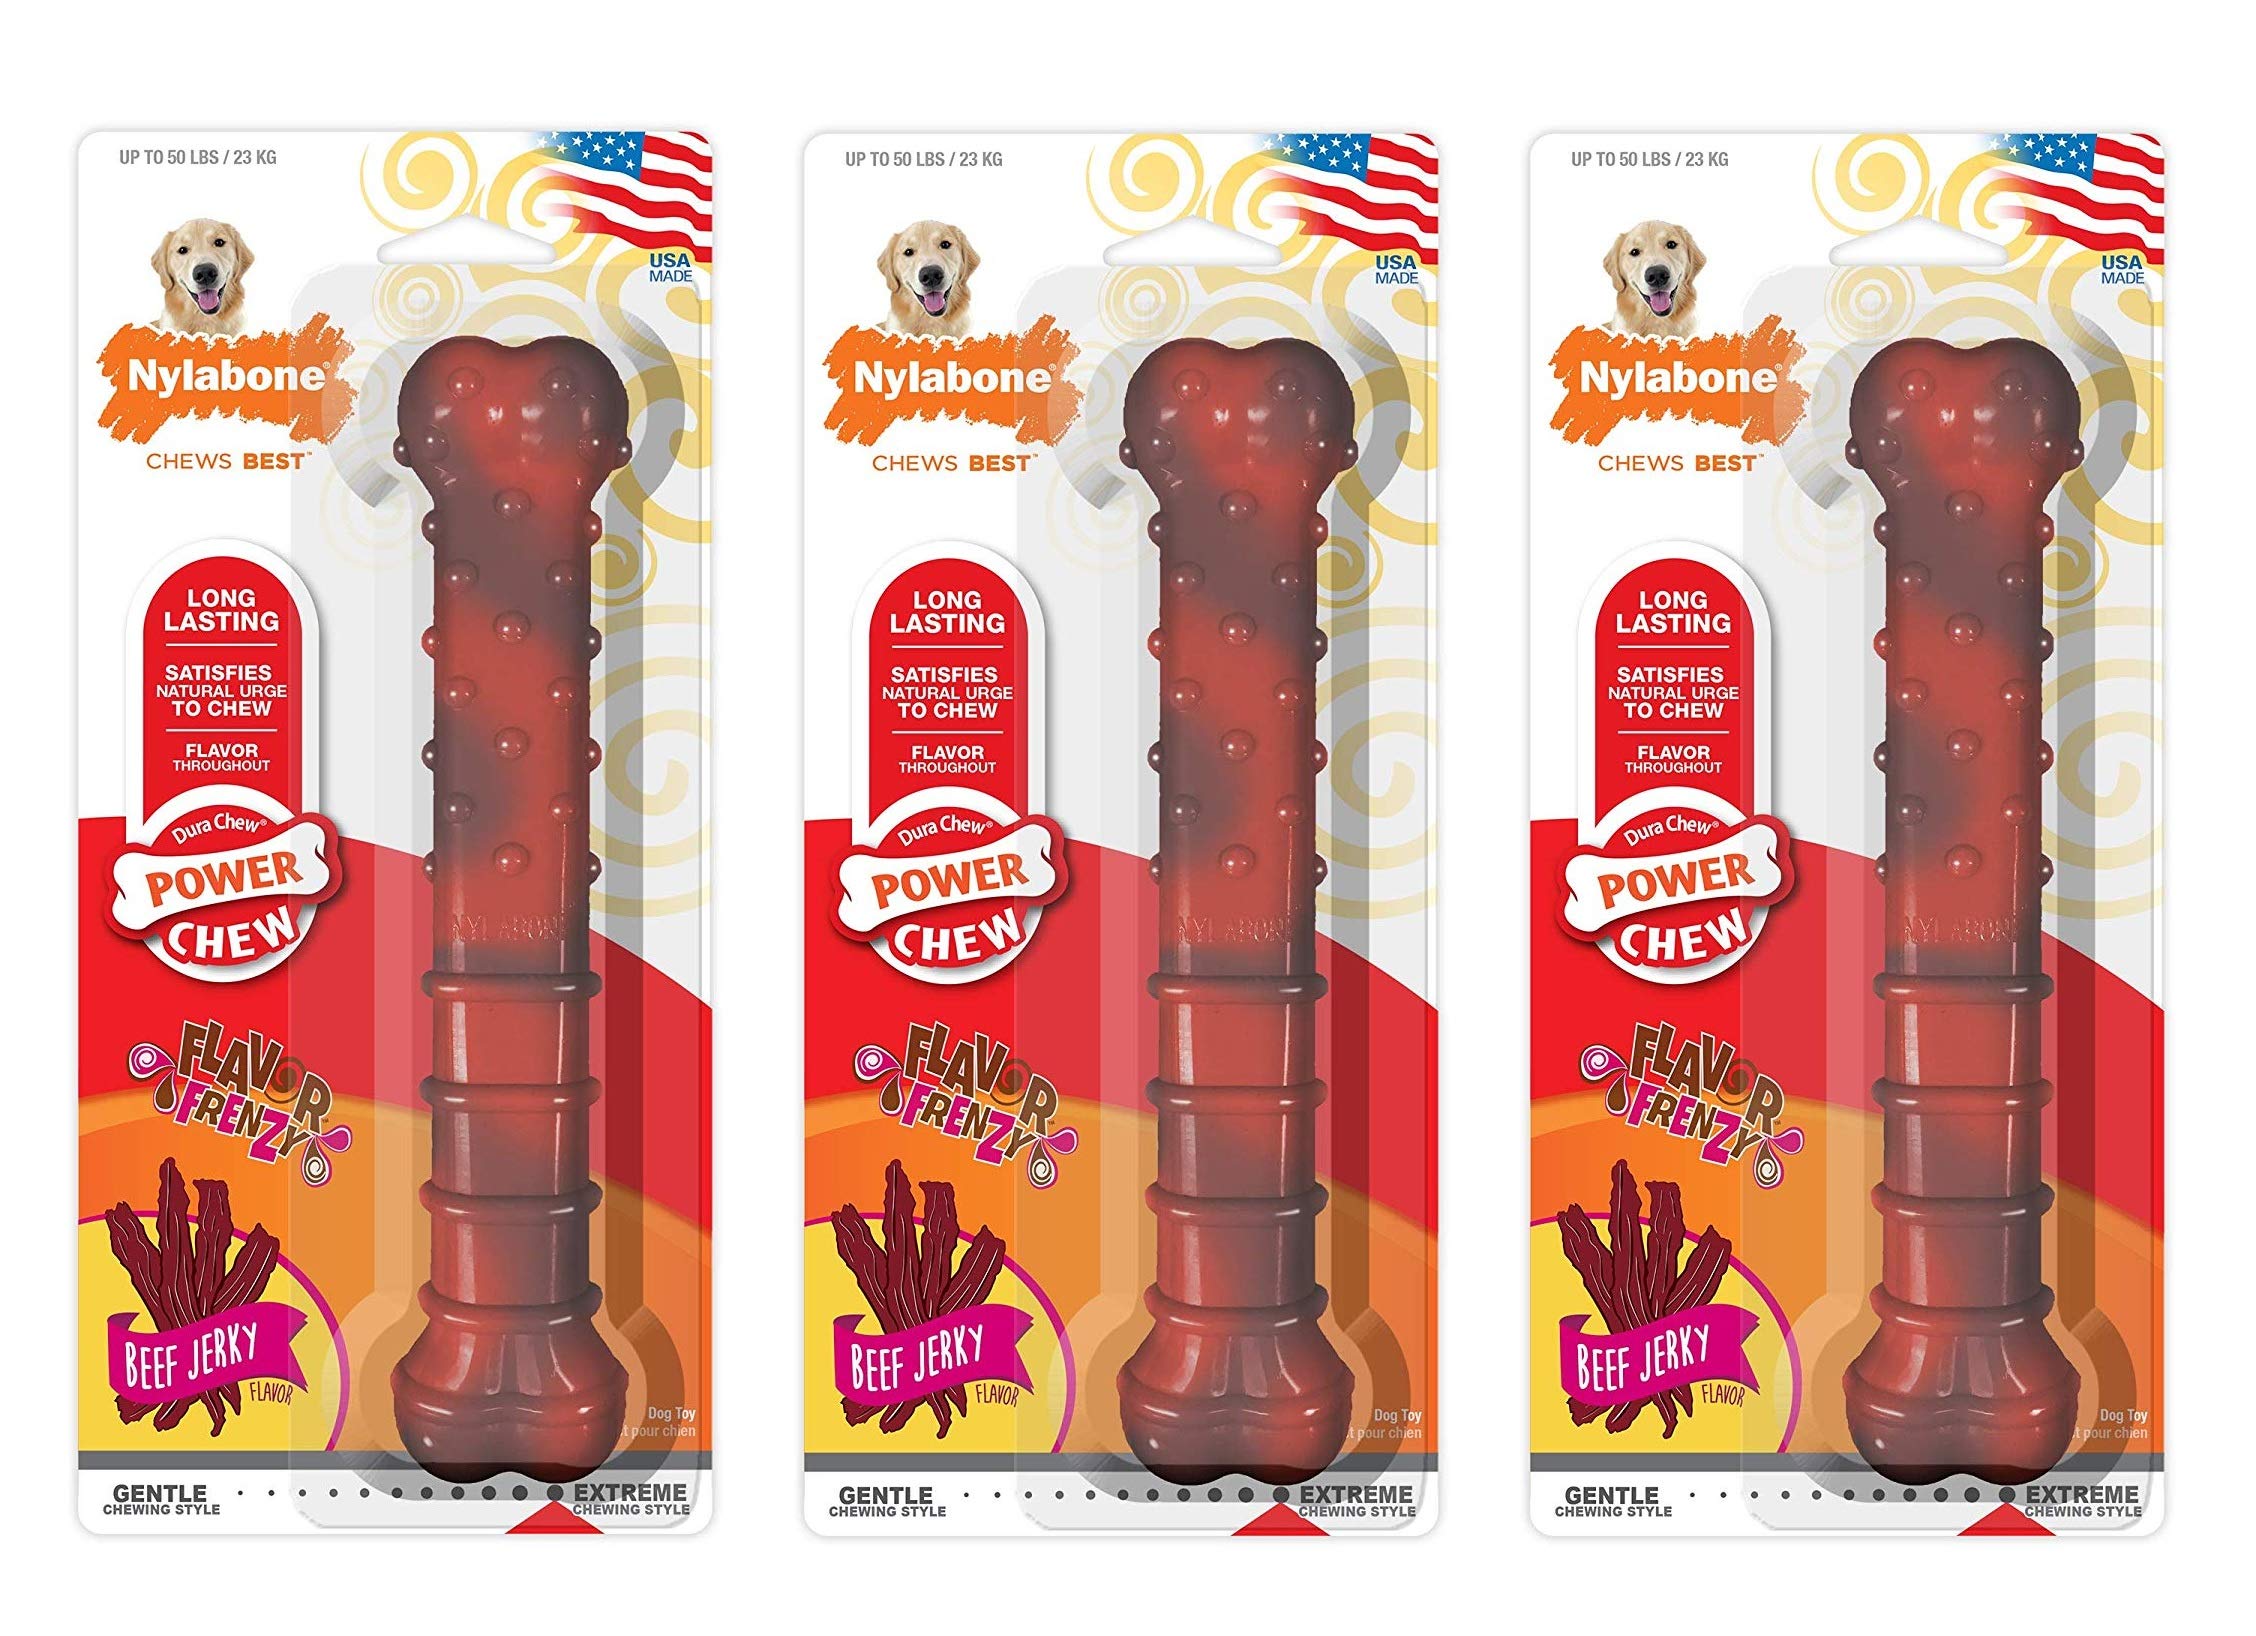 Nylabone Power Chew Textured Beef Jerky Flavored Large Dog Chew Toy - 3 Pack